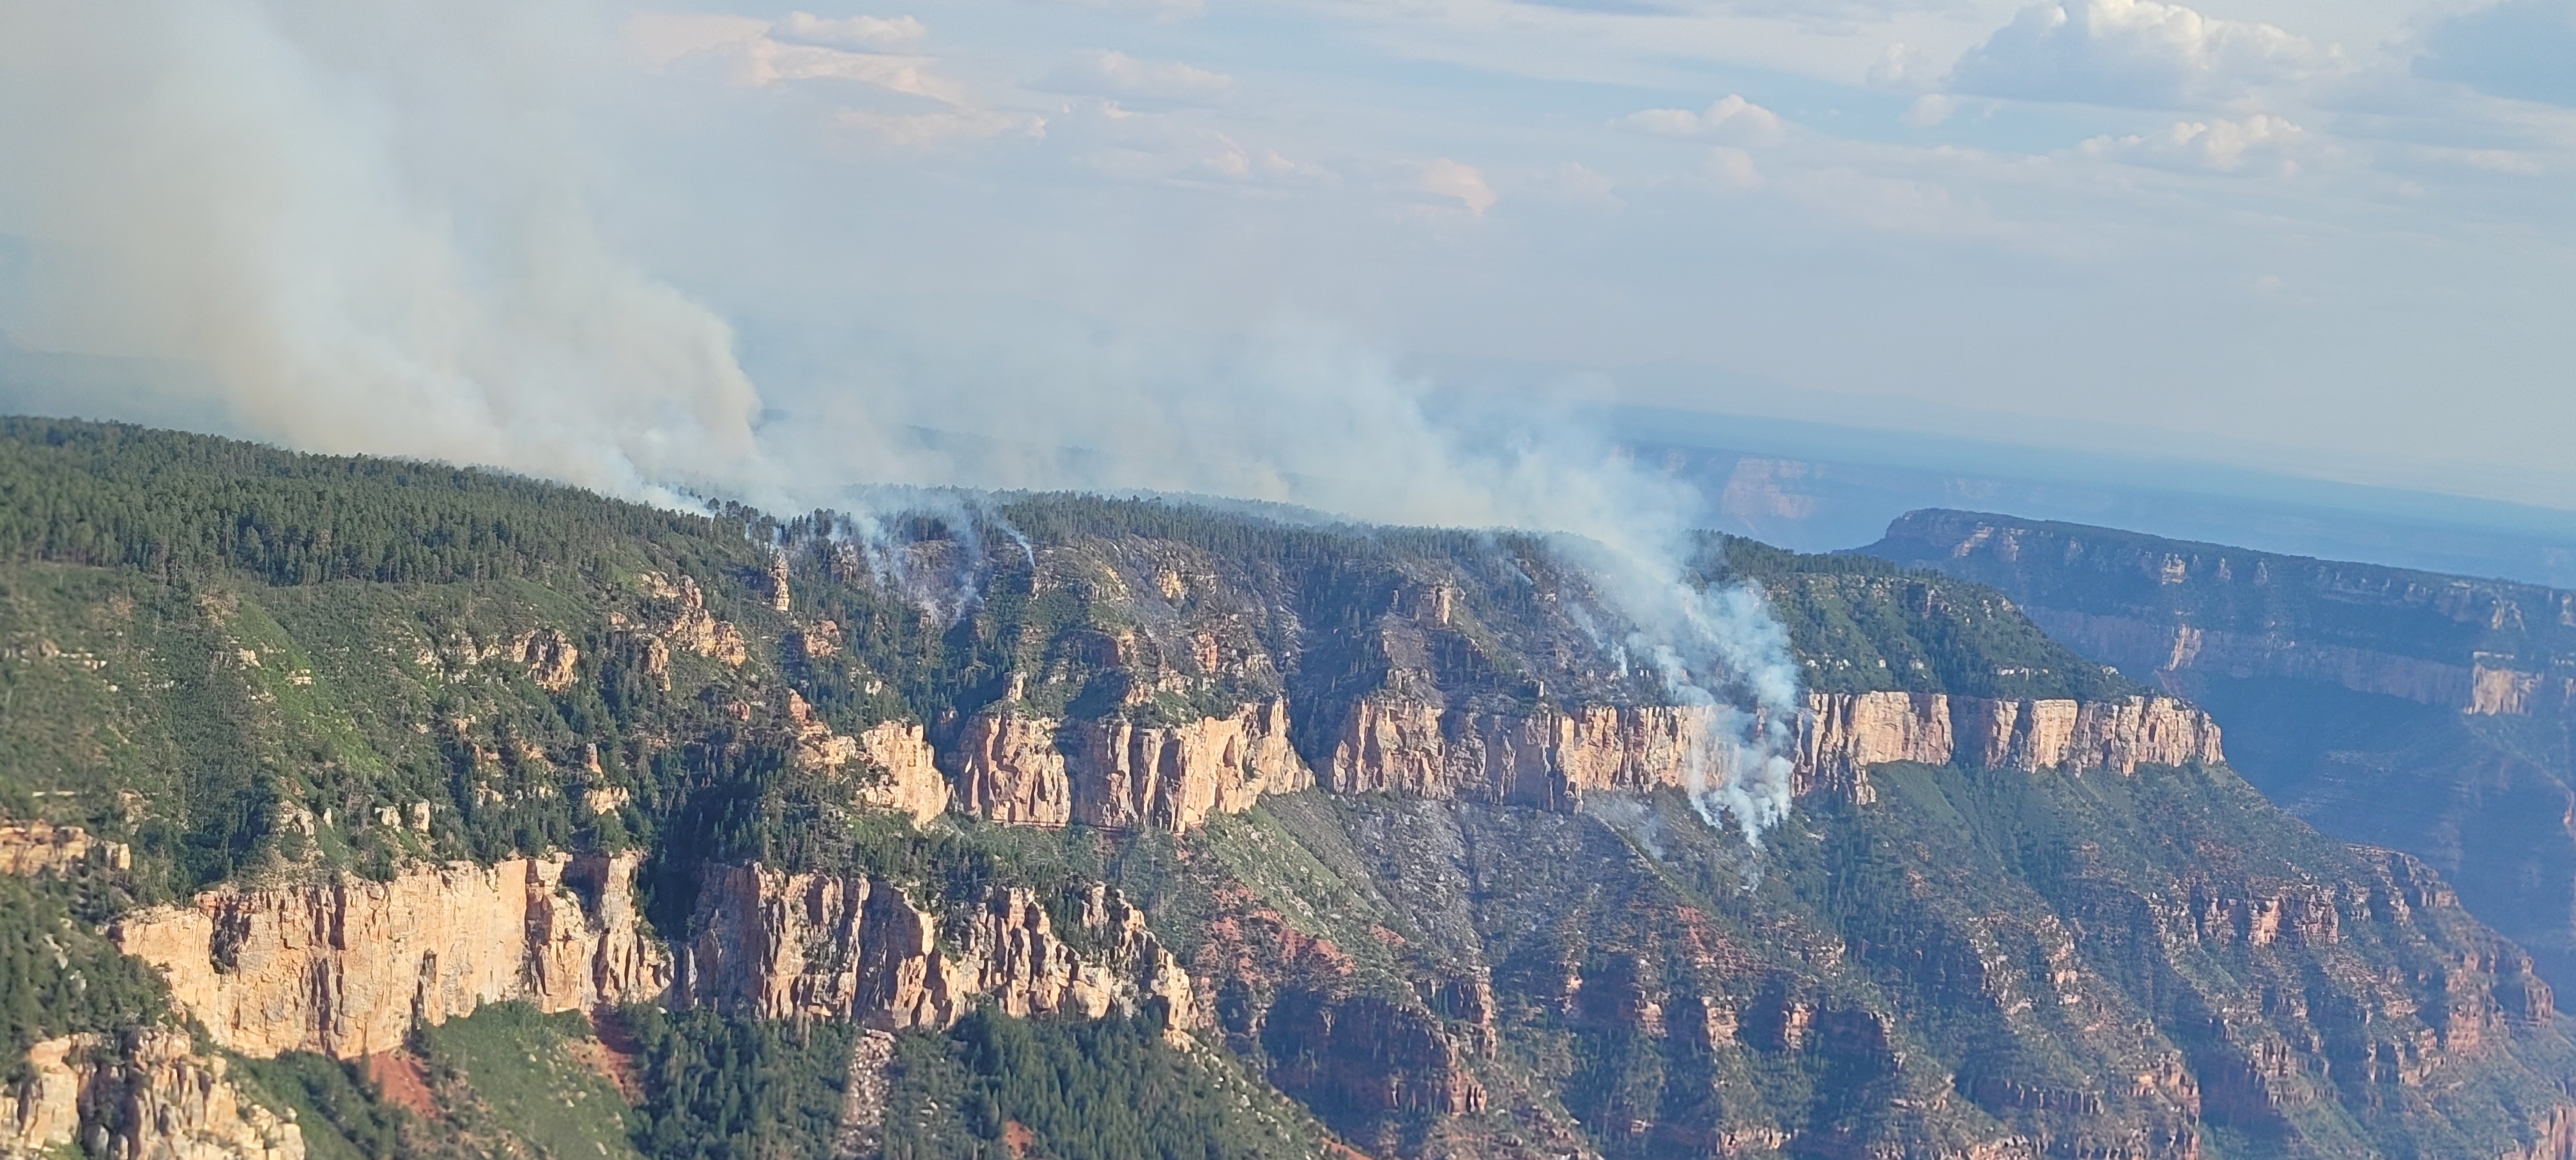 The Dragon Fire is seen below the rim of the canyon with smoke billowing